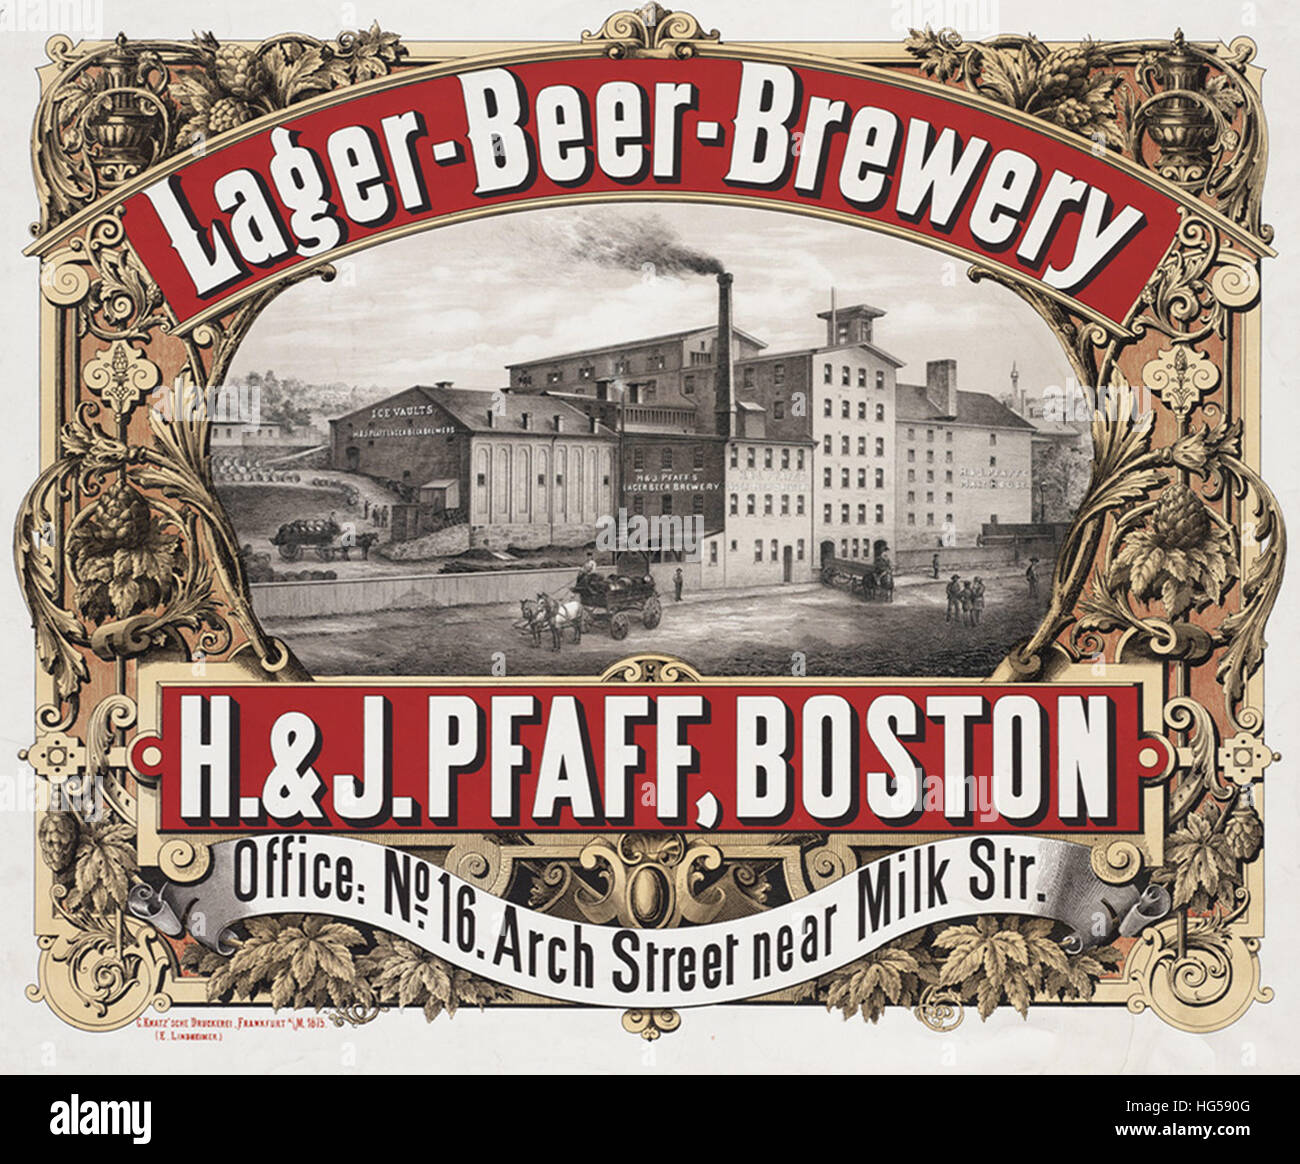 Boston Brewery Posters -  Lager-beer-brewery, H. & J. Pfaff, Boston Stock Photo